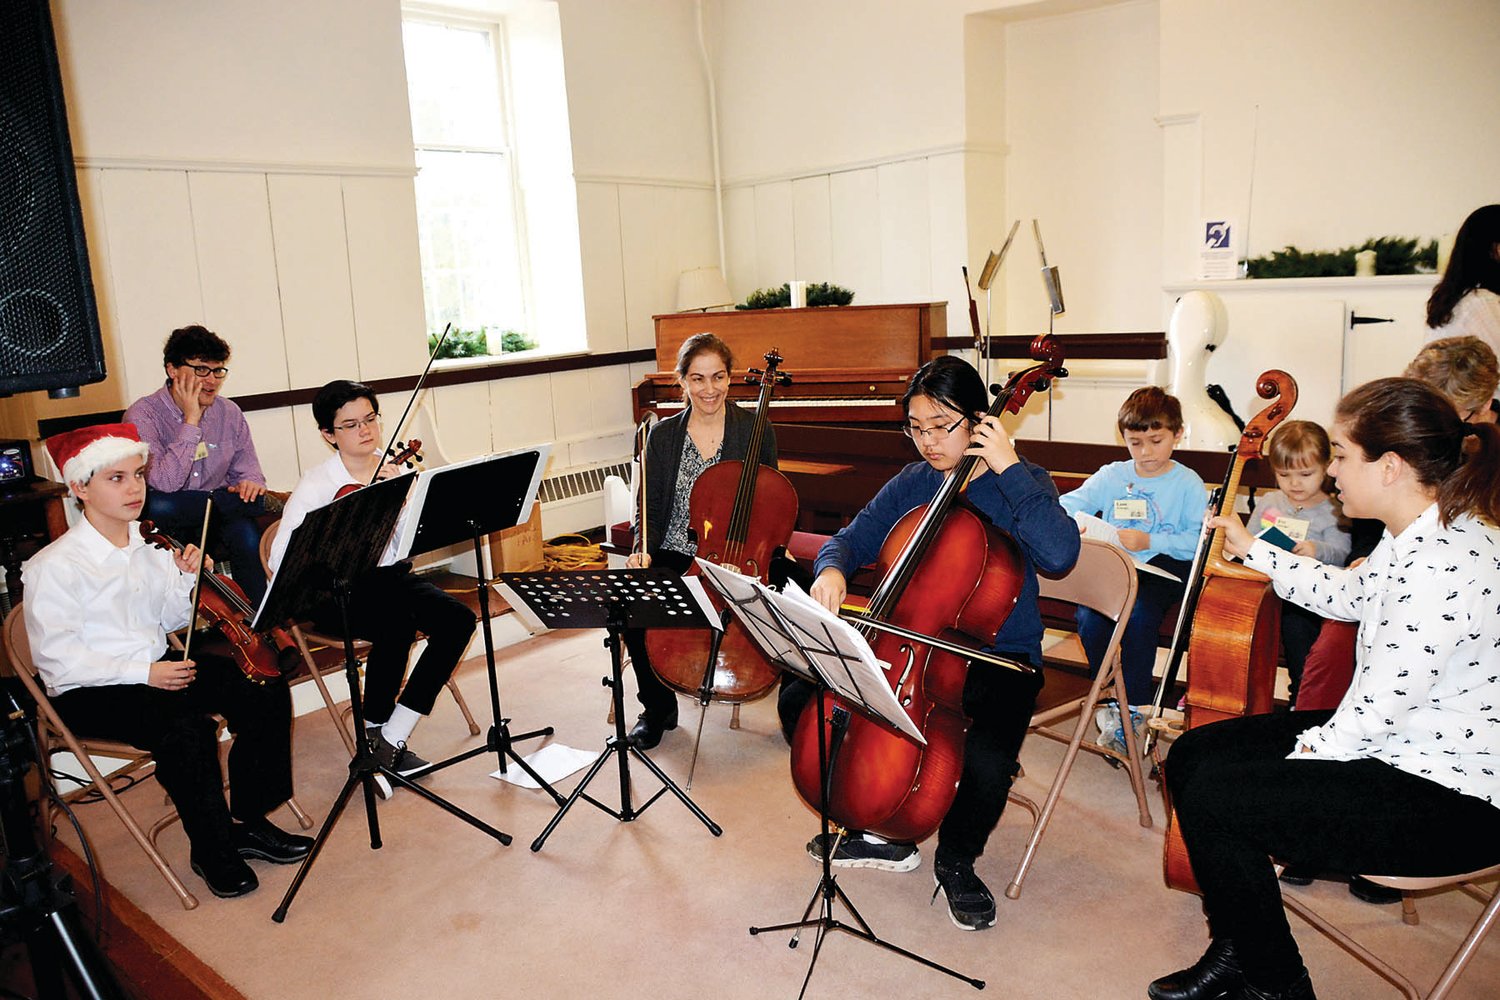 A young musicians orchestra at Newtown Friends Meeting is led by Debbie Watts, a music educator and member of the Meeting.